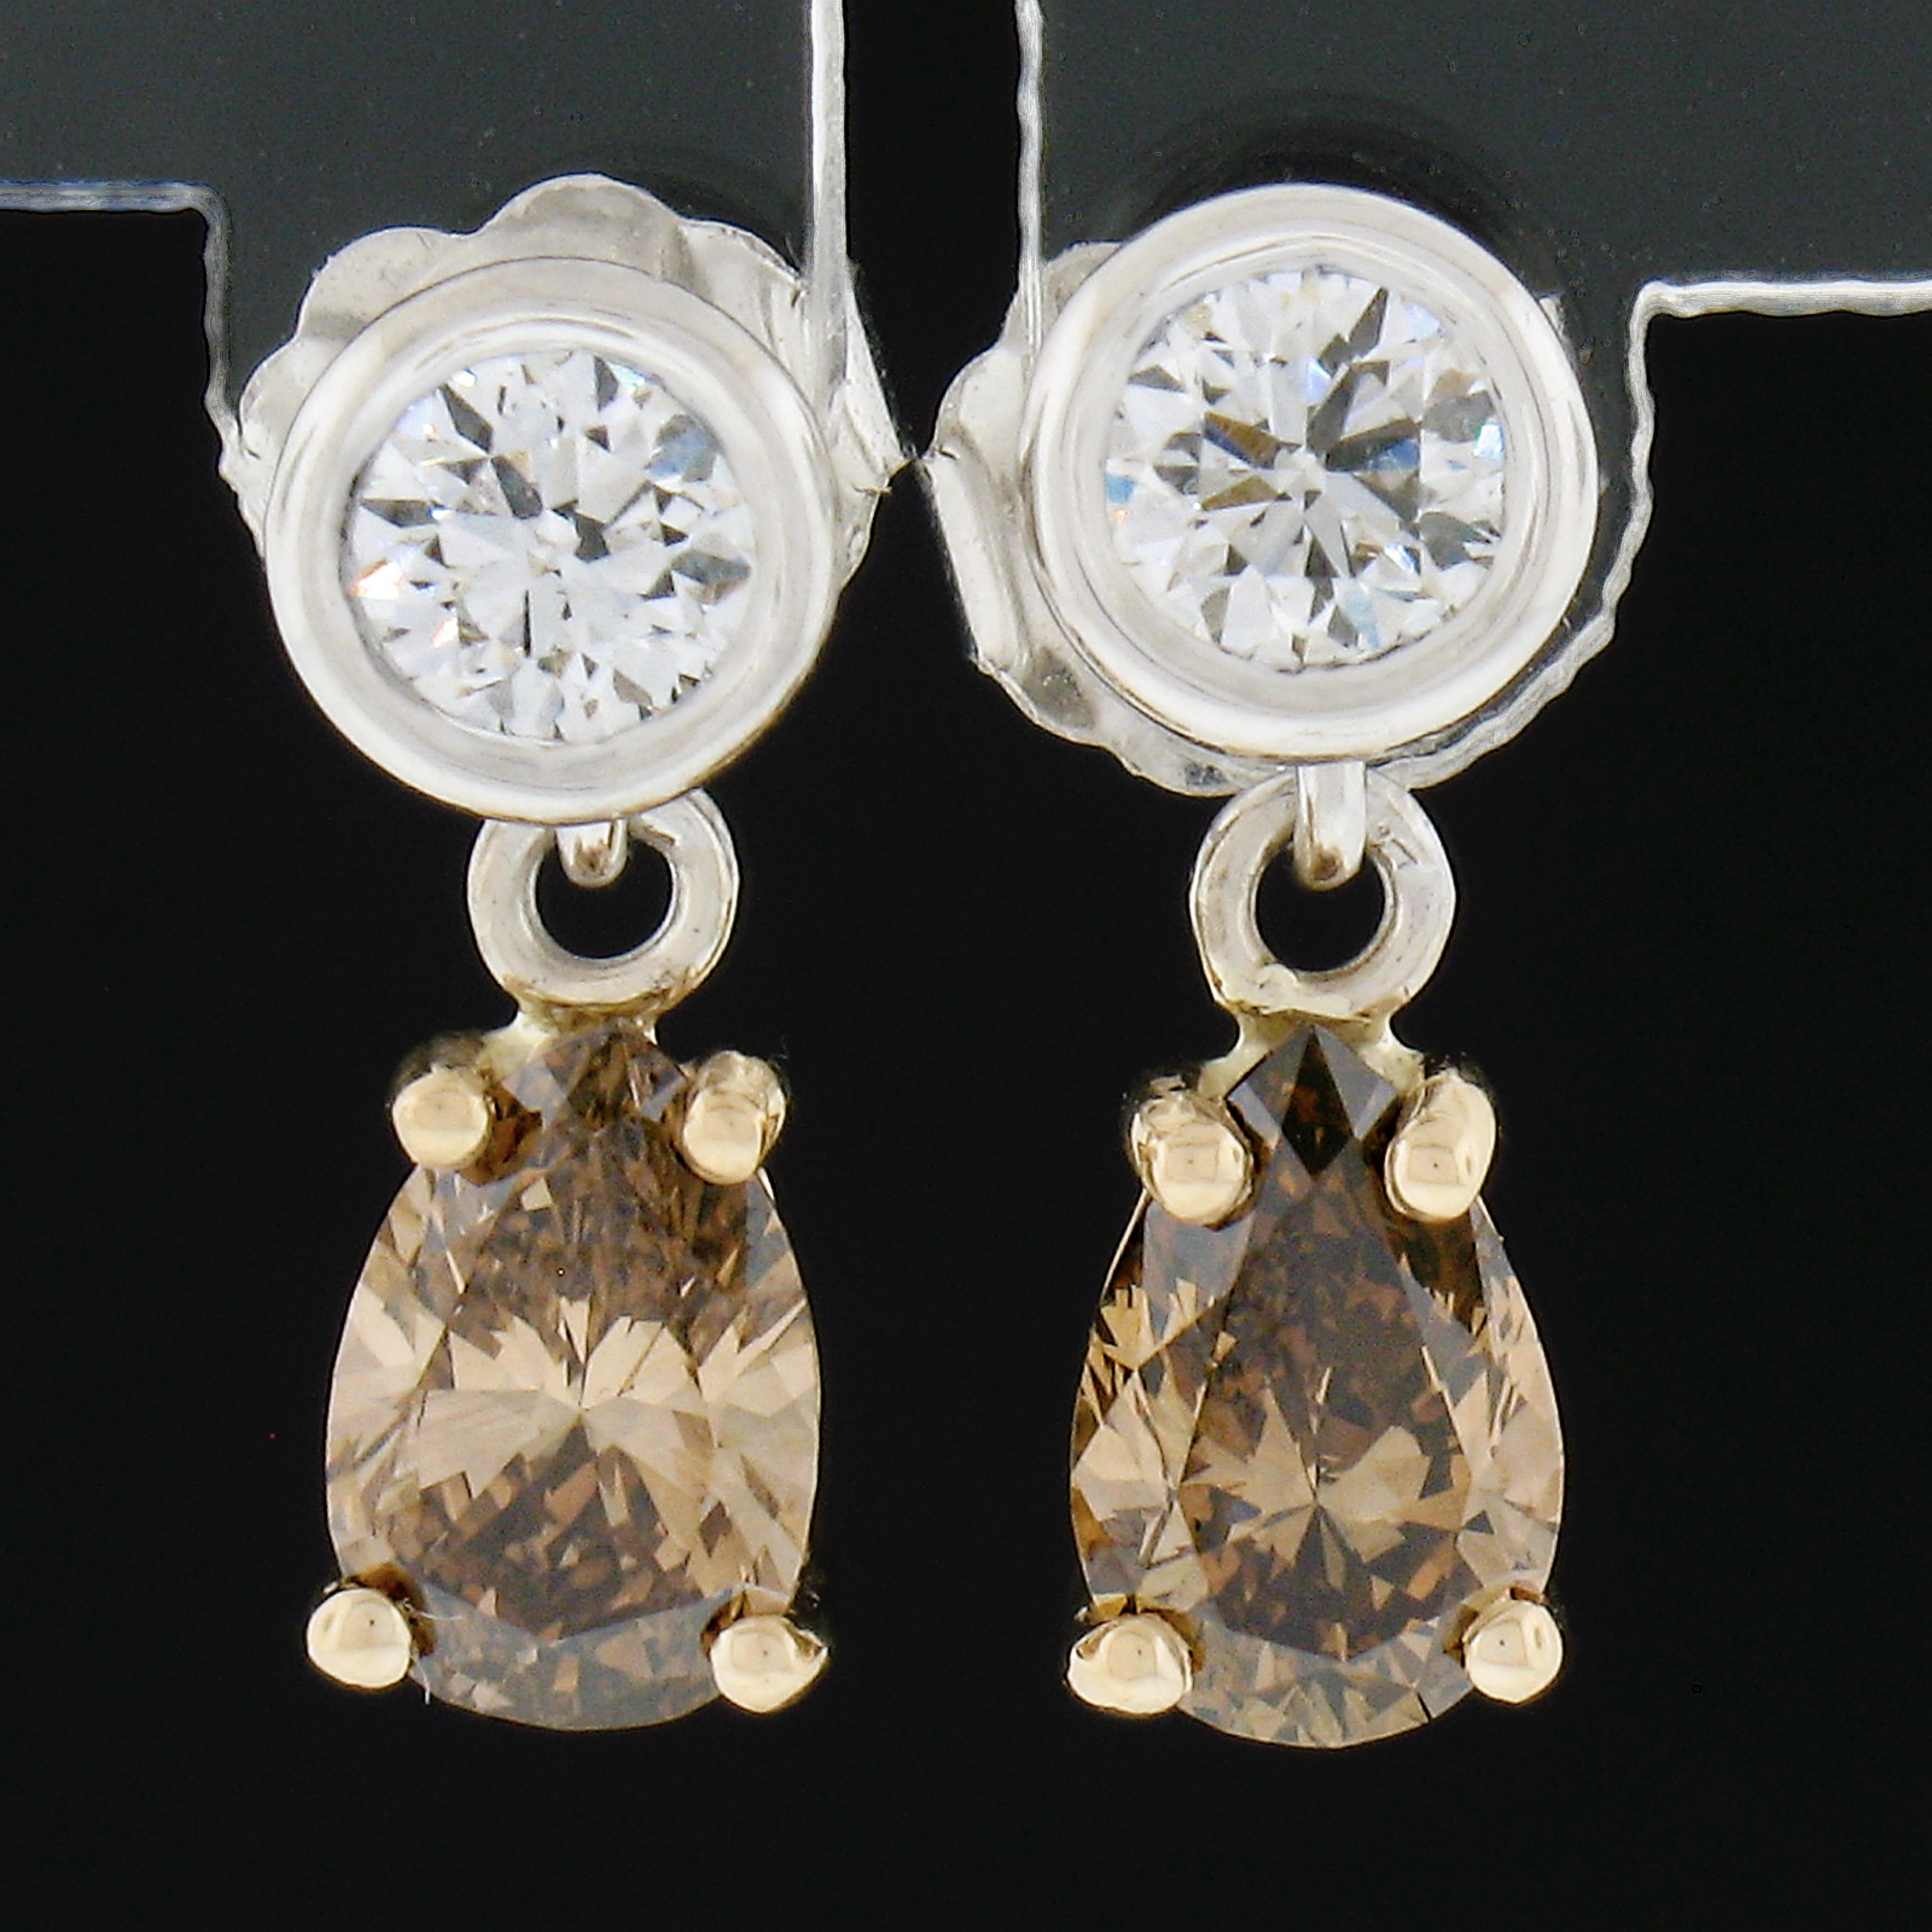 These new drop/dangle elegant earrings are crafted in solid 14k yellow and white gold. They feature 2 round brilliant cut bezel set diamonds and 2 dangling pear cut fancy brown prong set diamonds. These simple yet elegant earrings can be dressed up